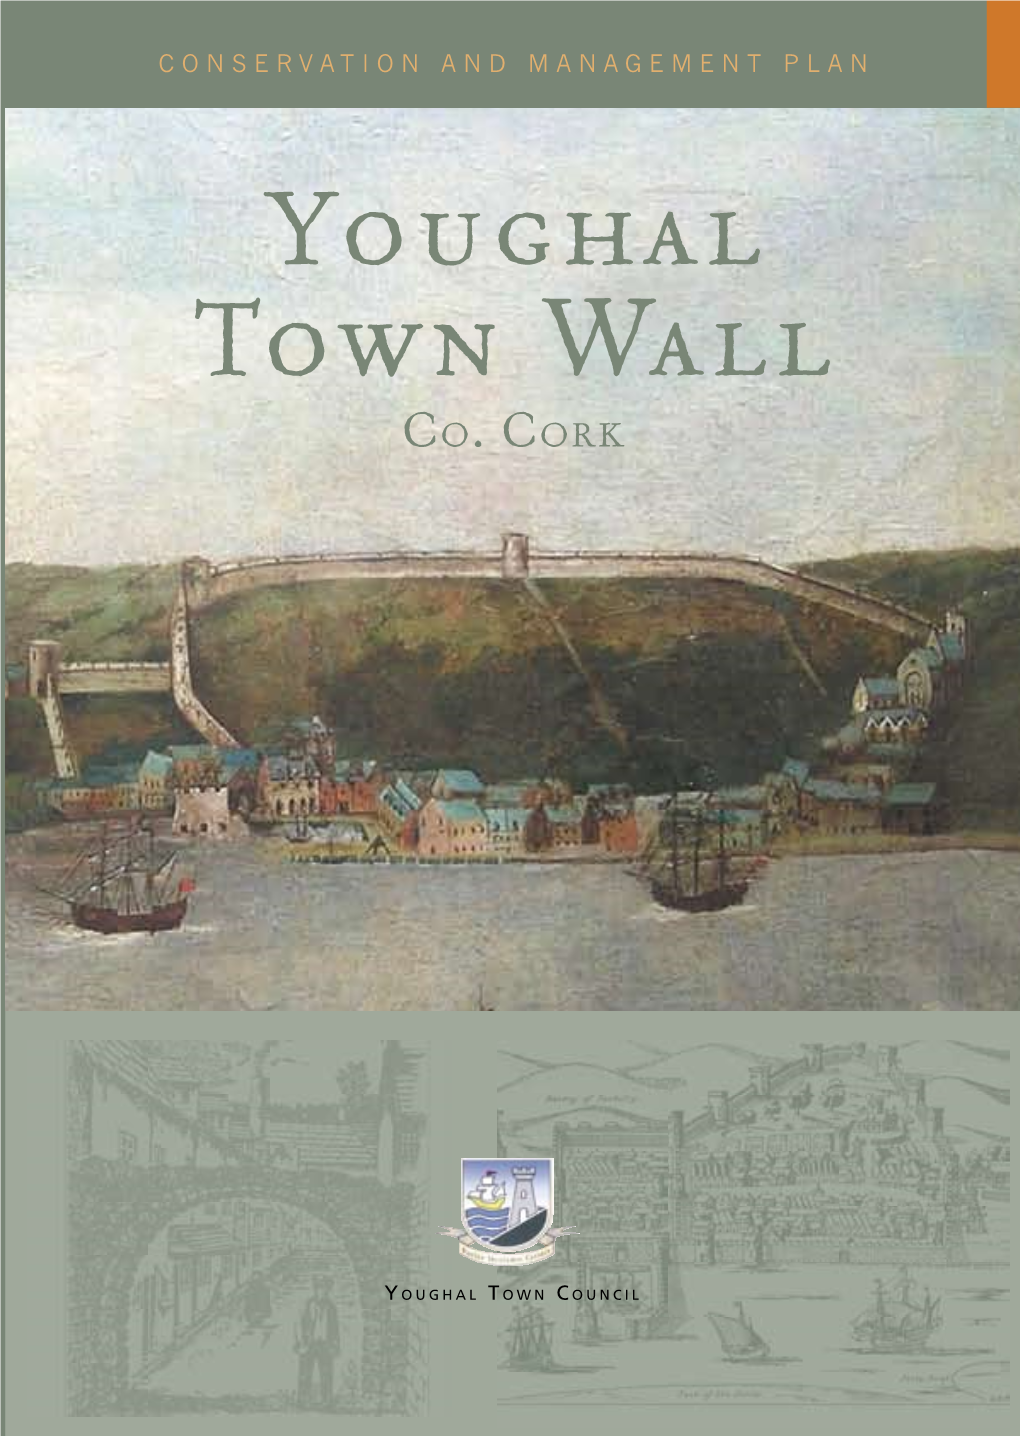 Youghal Town Walls Conservation and Management Plan